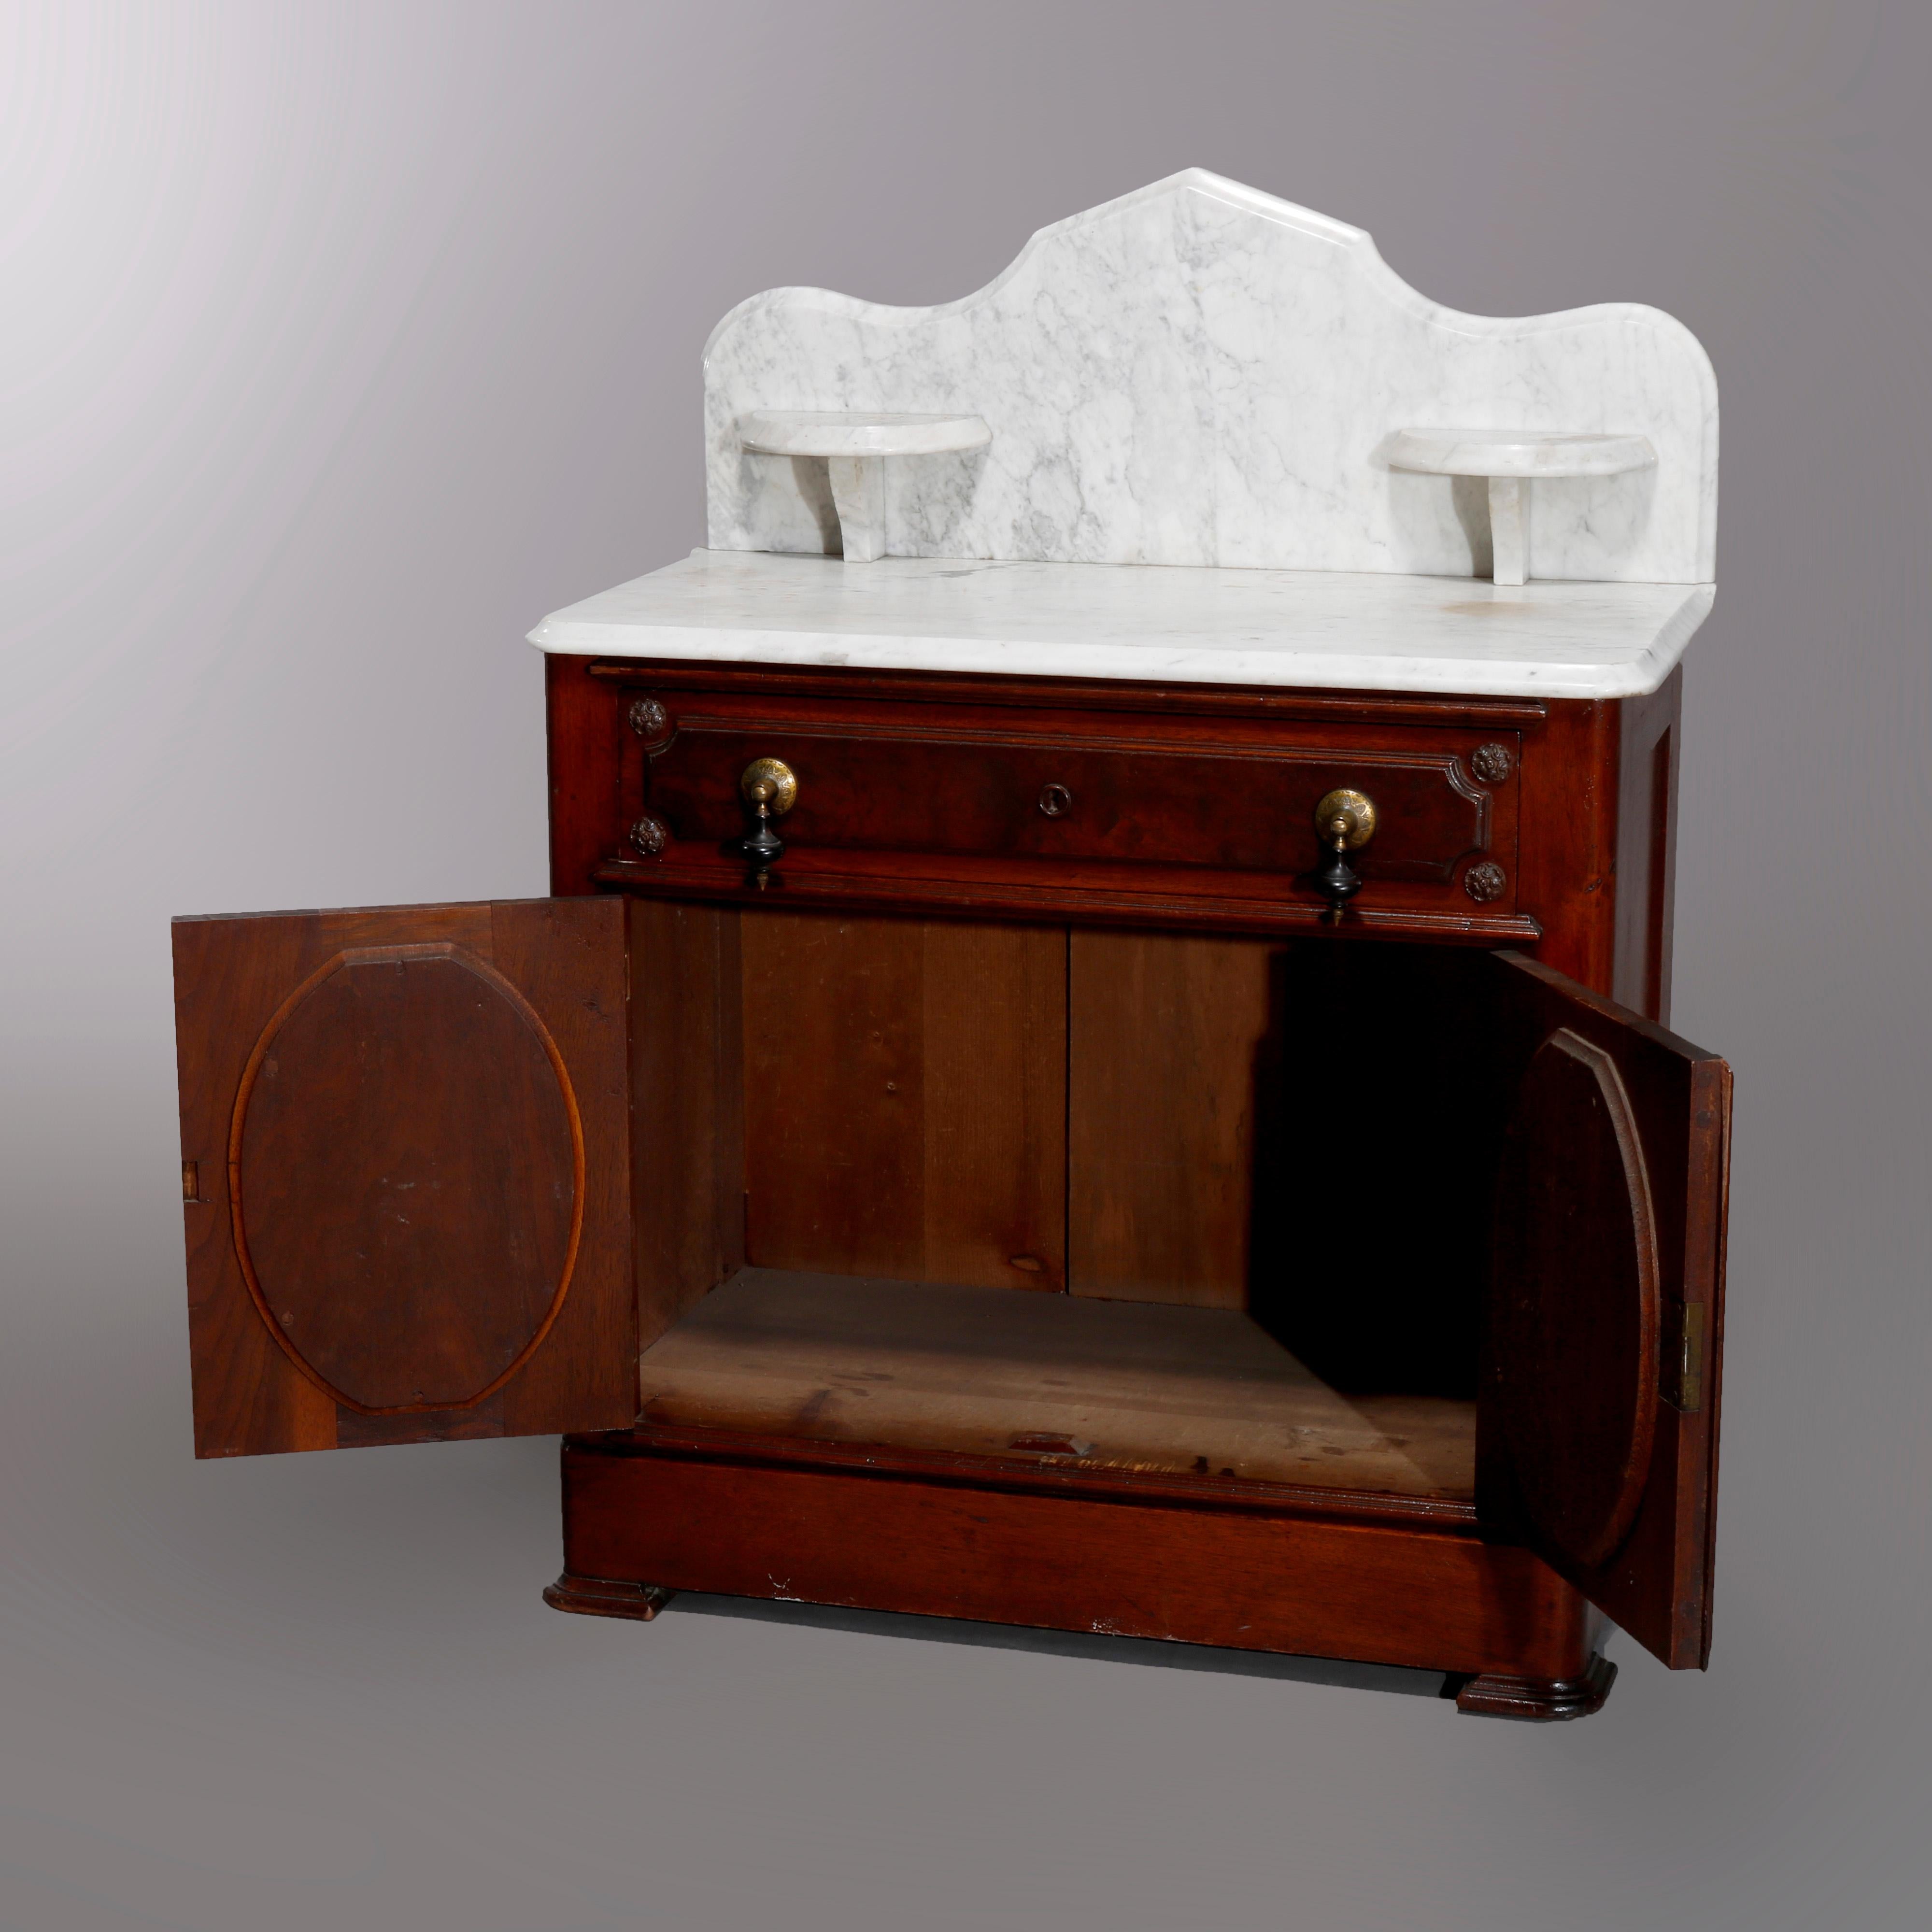 An antique Victorian washstand offers marble top having shaped backsplash with flanking candle stands and surmounting walnut base with burl frieze drawer over double paneled door cabinet, c1890

Measures: 40.75